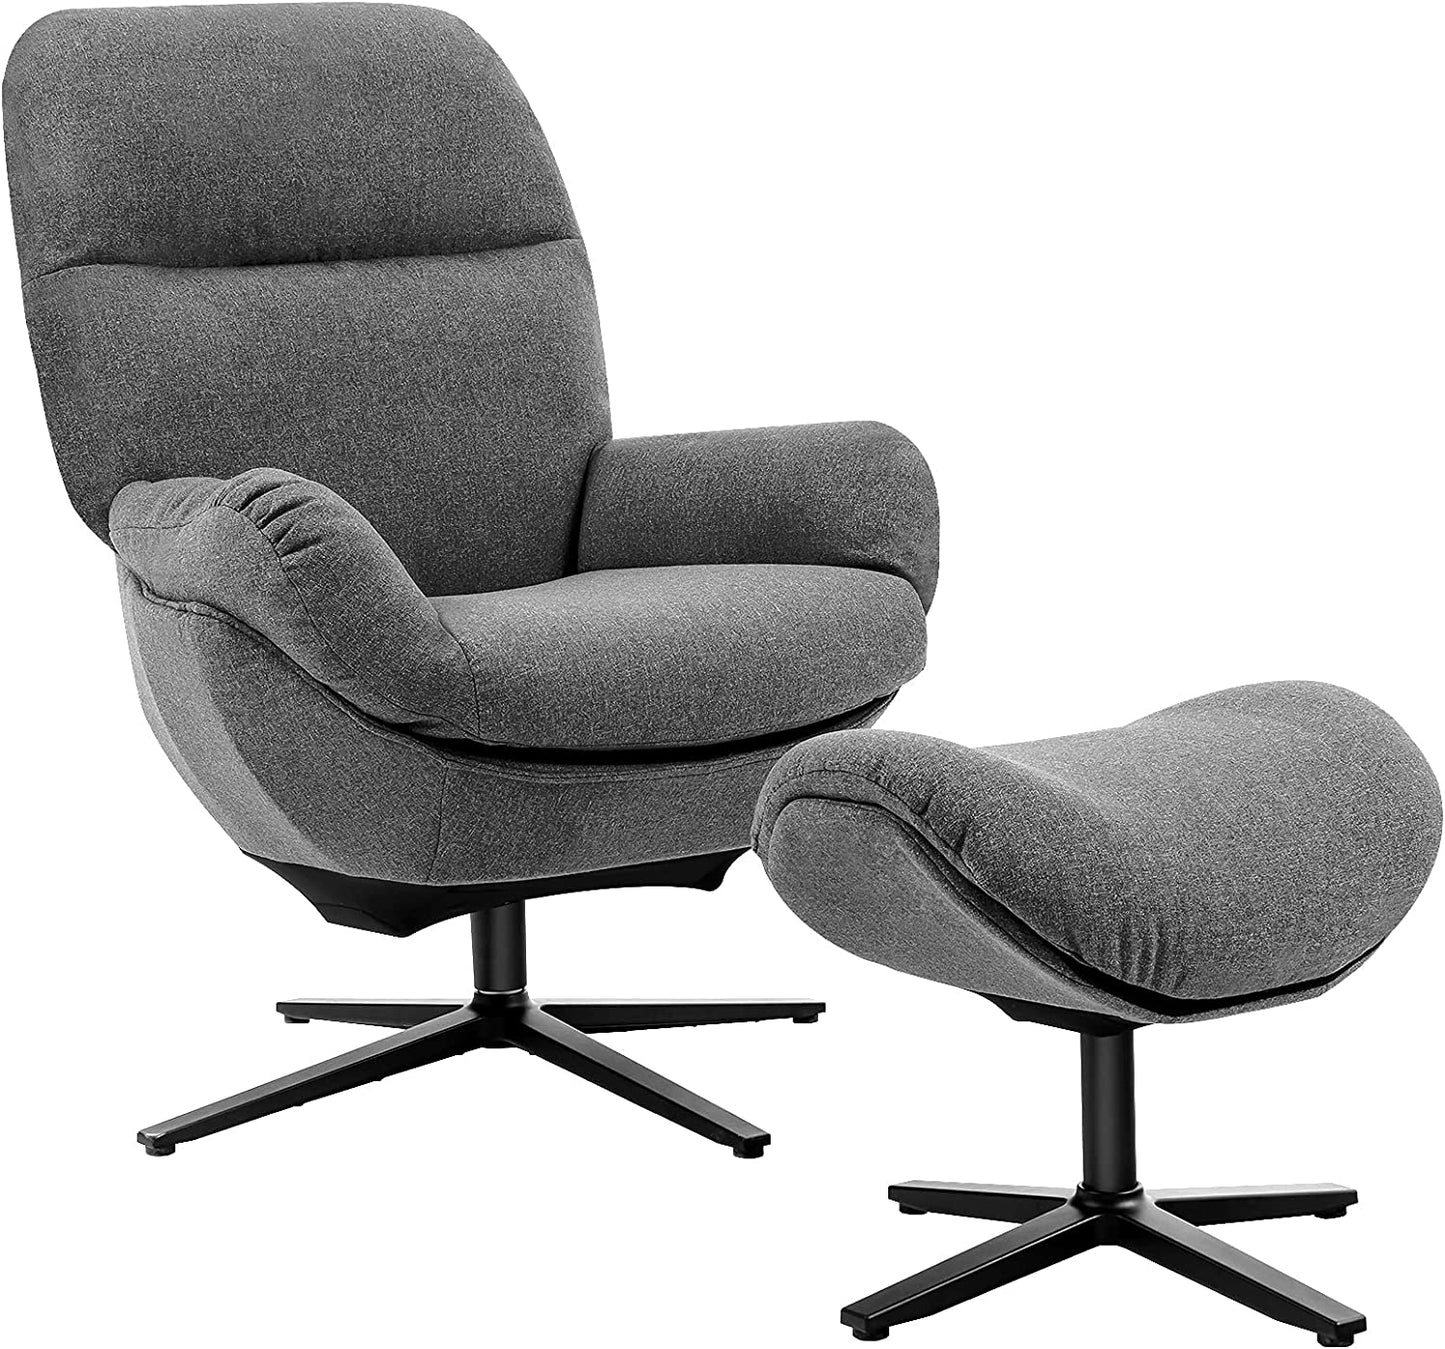 Modern Swivel Lounge Rocking Chair Upholstered 360 Accent Lazy Recliner Armchair with Ottoman and Aluminum Alloy Base